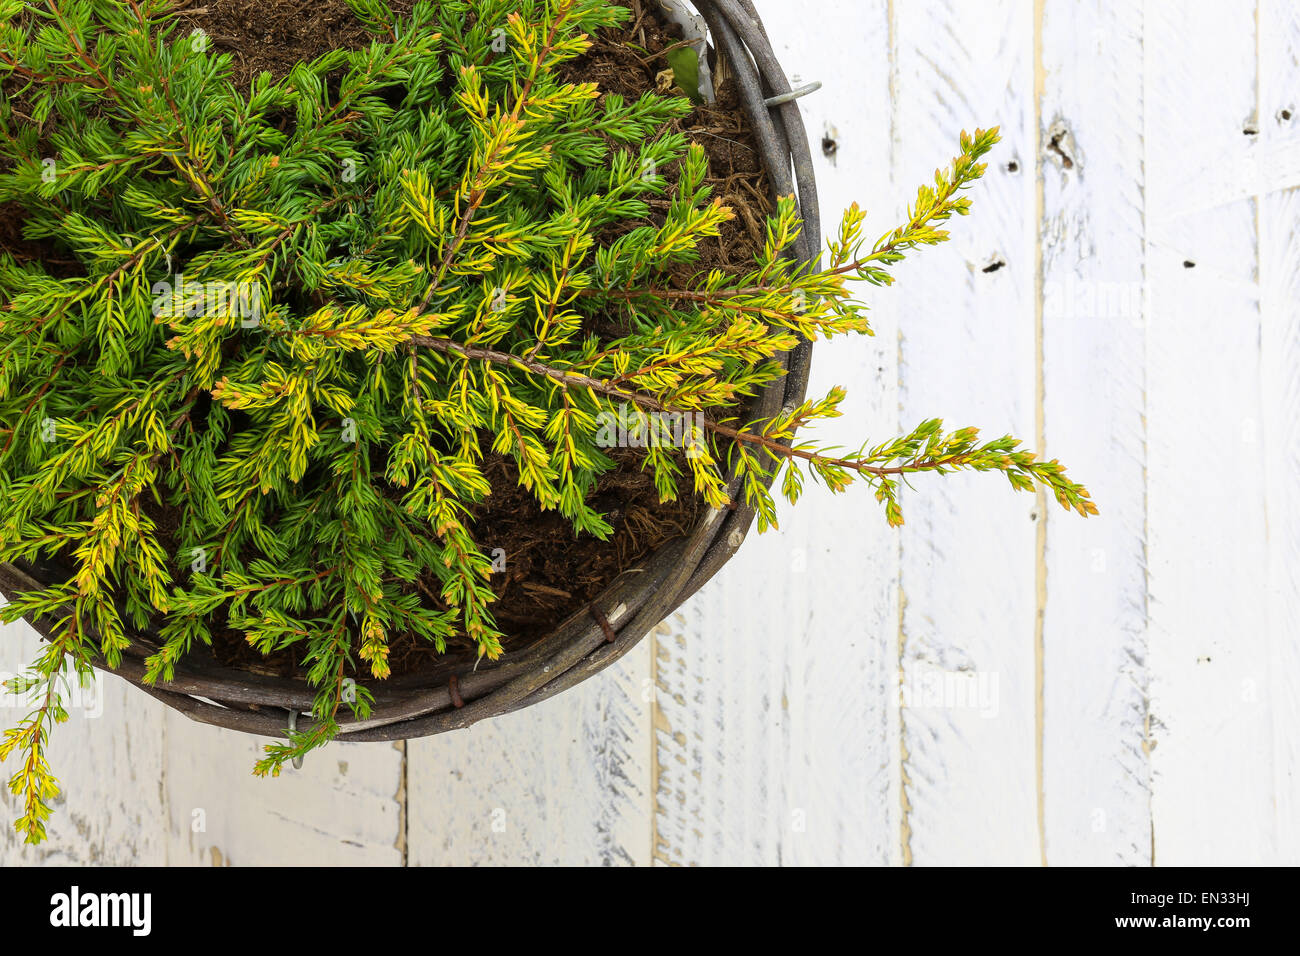 Golden Juniper ground cover plant in wicker basket, green yellow branches on white painted wooden background Stock Photo